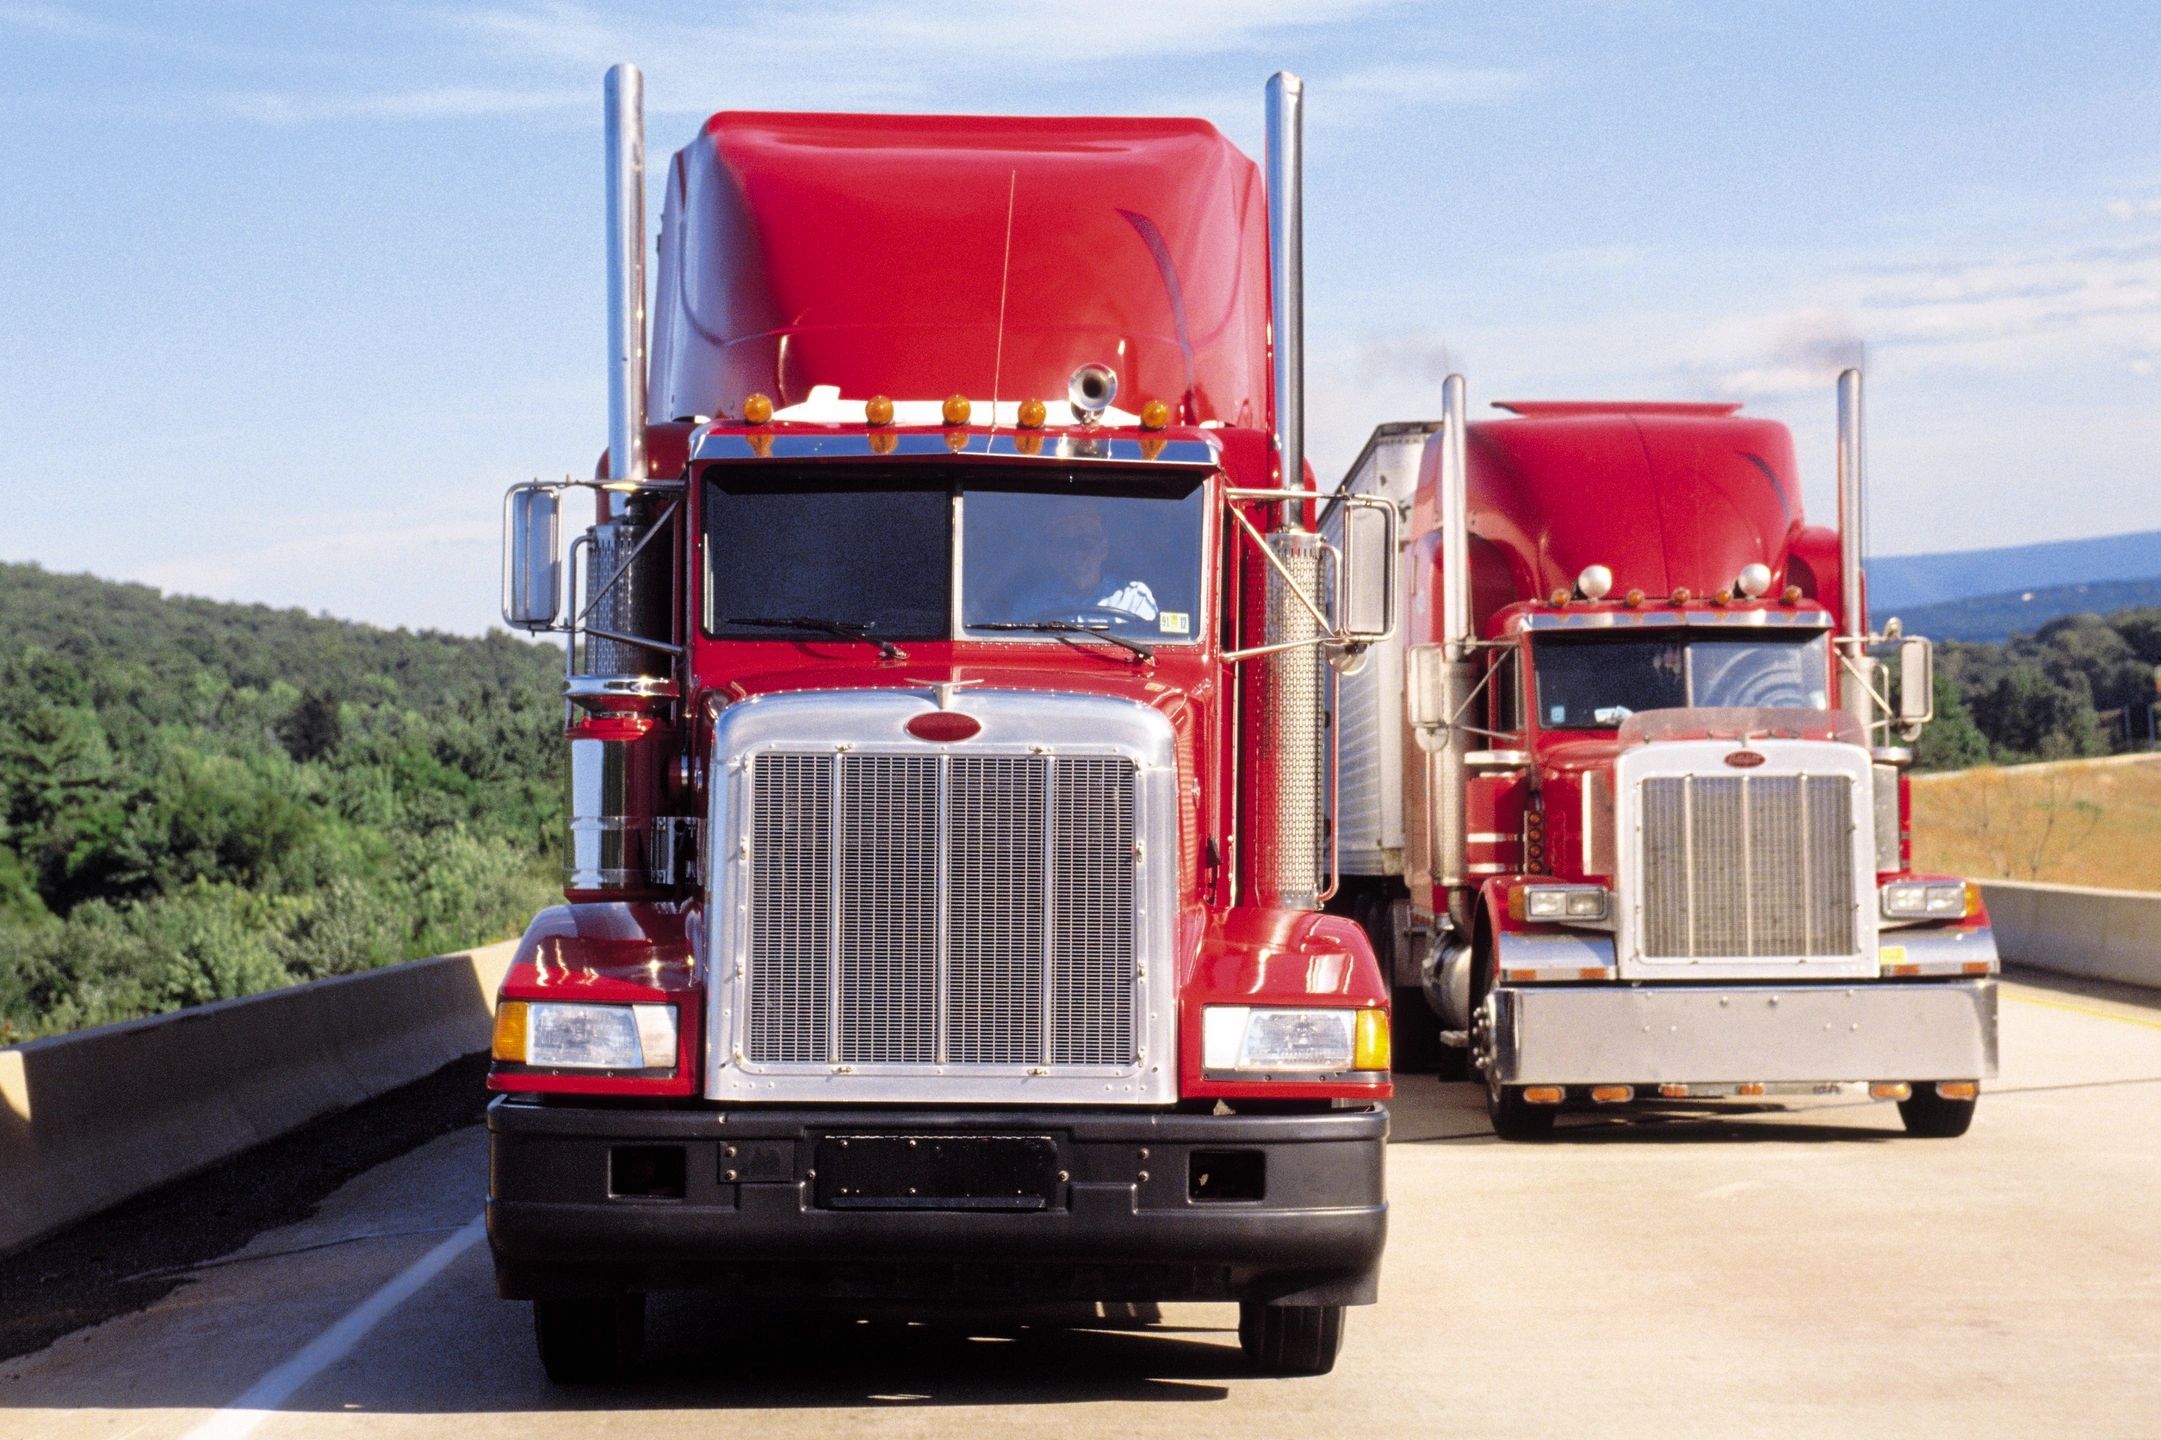 Commercial Drivers come see us to reduce tax liability and for tax resolution. If you need a tax pro